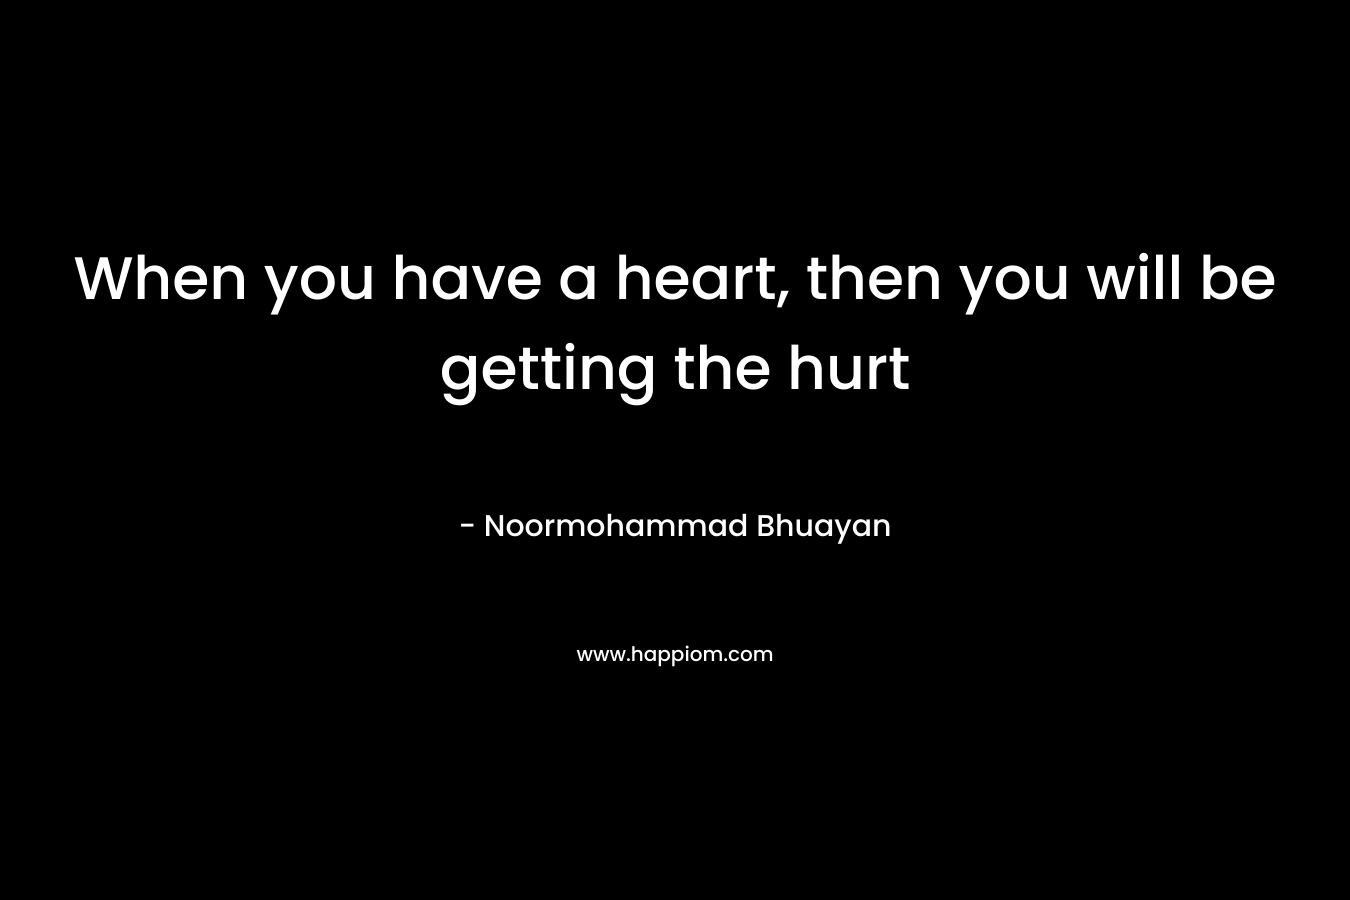 When you have a heart, then you will be getting the hurt – Noormohammad Bhuayan